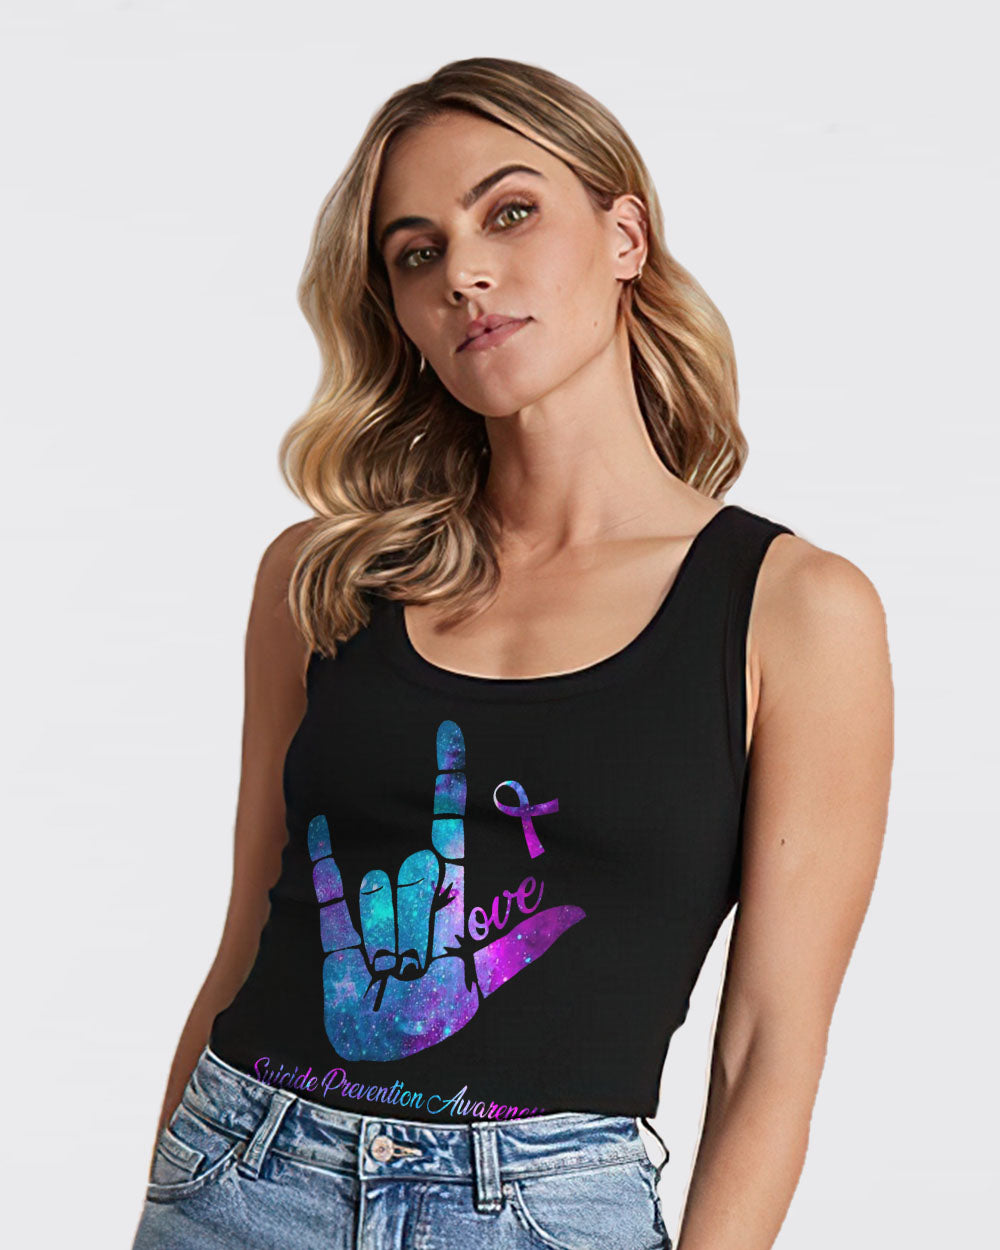 Love Hand Galaxy Women's Suicide Prevention Awareness Tanks